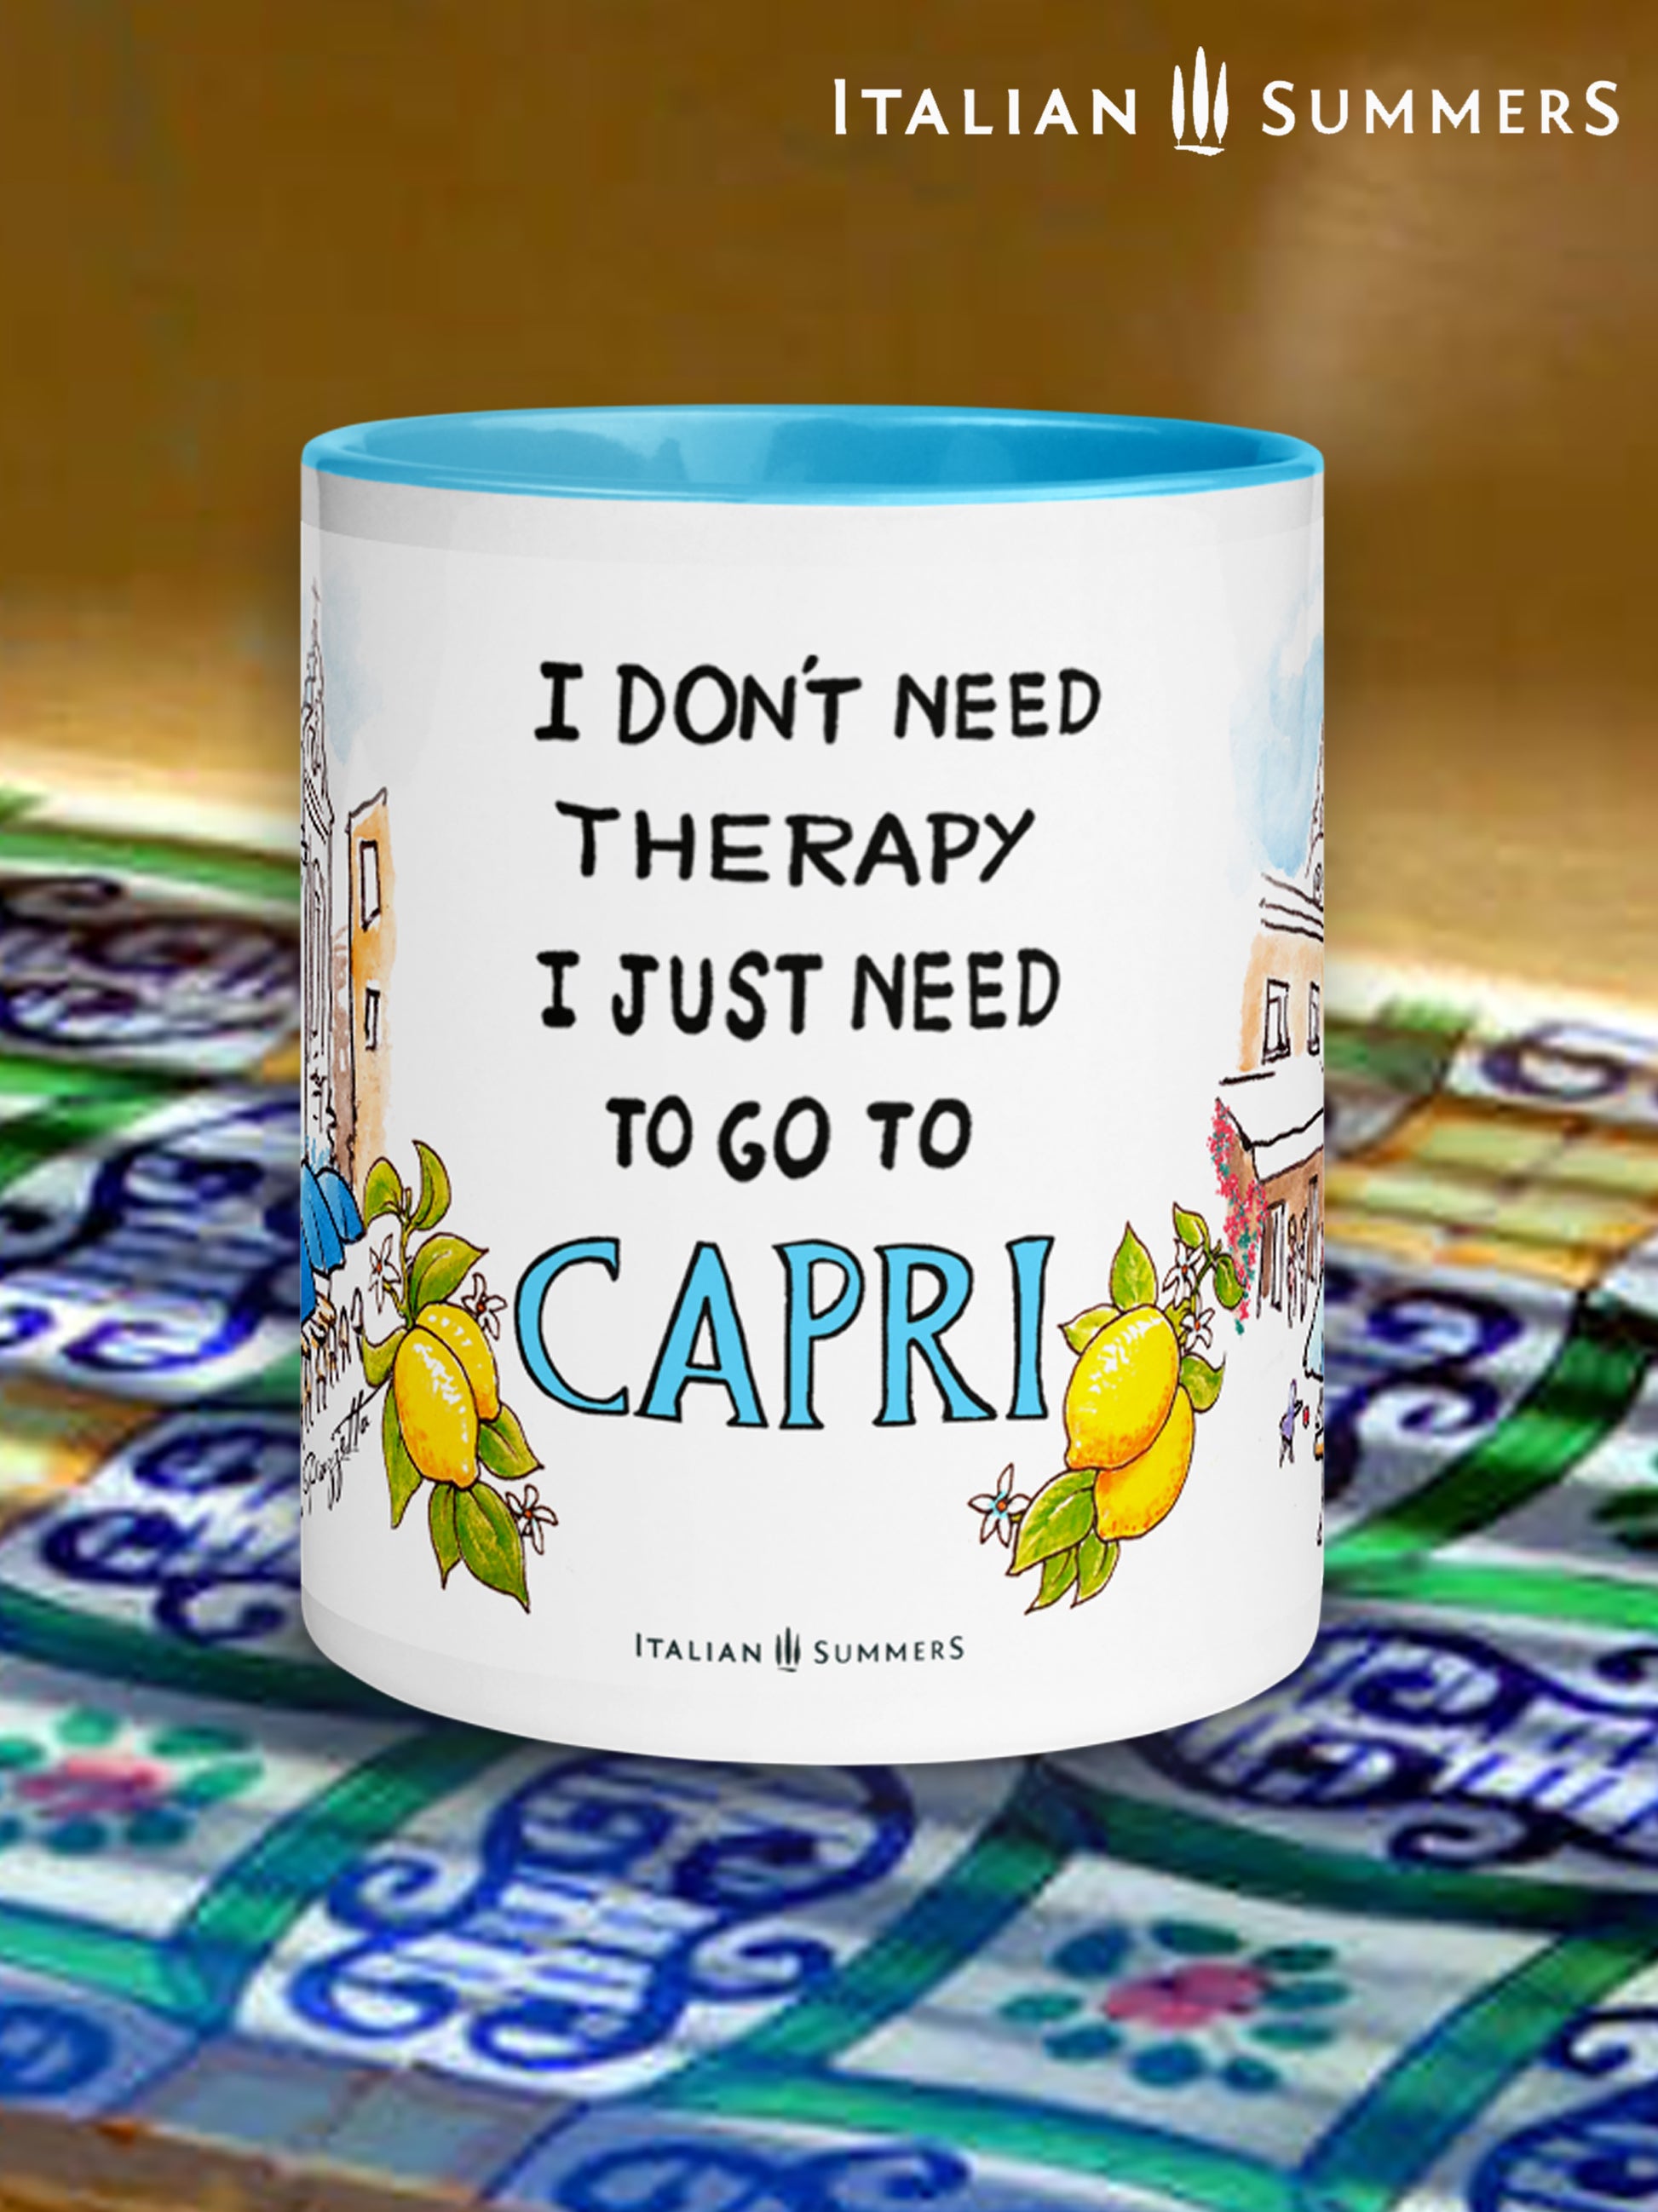 Italy-inspired white ceramic mug with blue colored handle and interior. Printed with a drawing of Capri's Piazzetta  with blue cafe Umbrellas and a crowd of shoppers strolling. The quote: I don't need therapy I just need to go to Capri is present . The word Italy is in blue Capital letters and flanked by bunches of Sorrento lemons with flowers. Made by Italian Summers